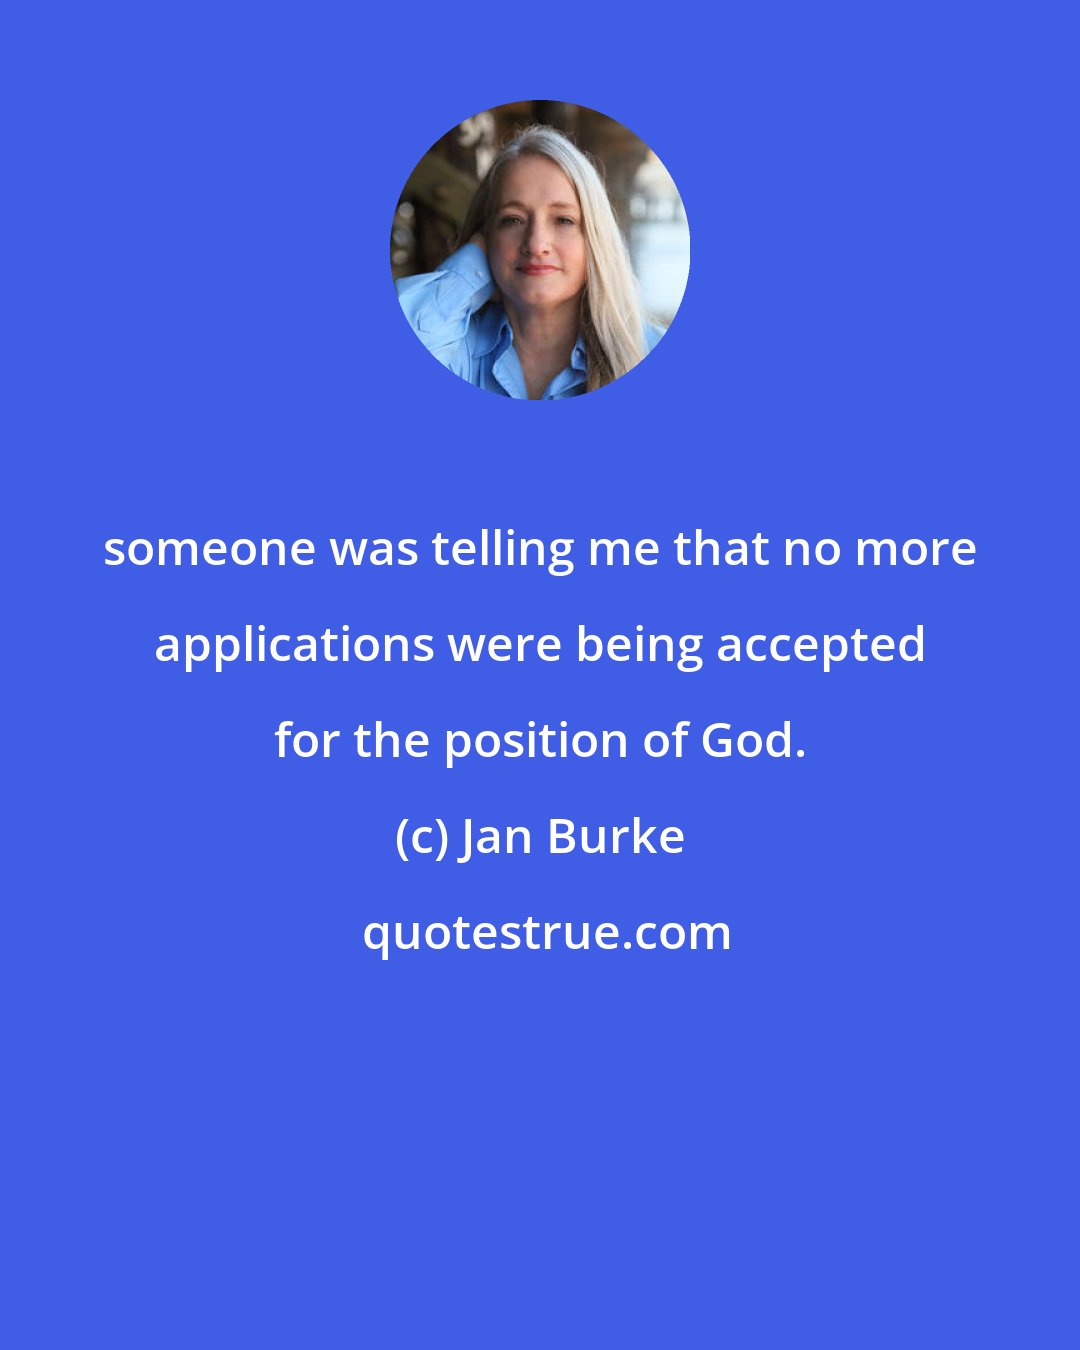 Jan Burke: someone was telling me that no more applications were being accepted for the position of God.